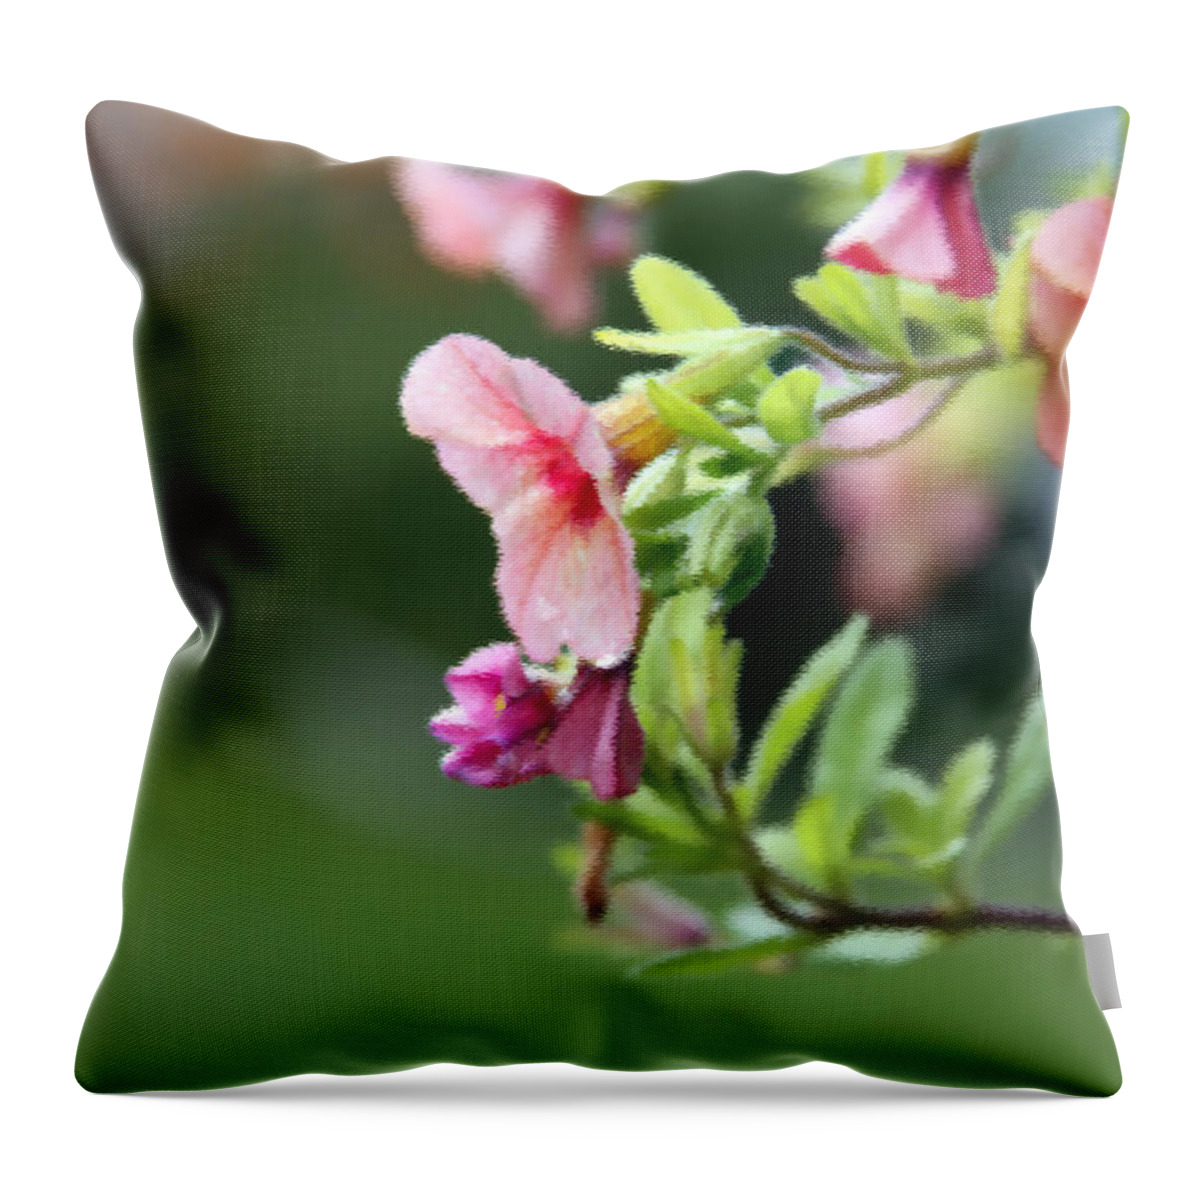 Flowers Throw Pillow featuring the photograph Summer Flowers by Jackson Pearson